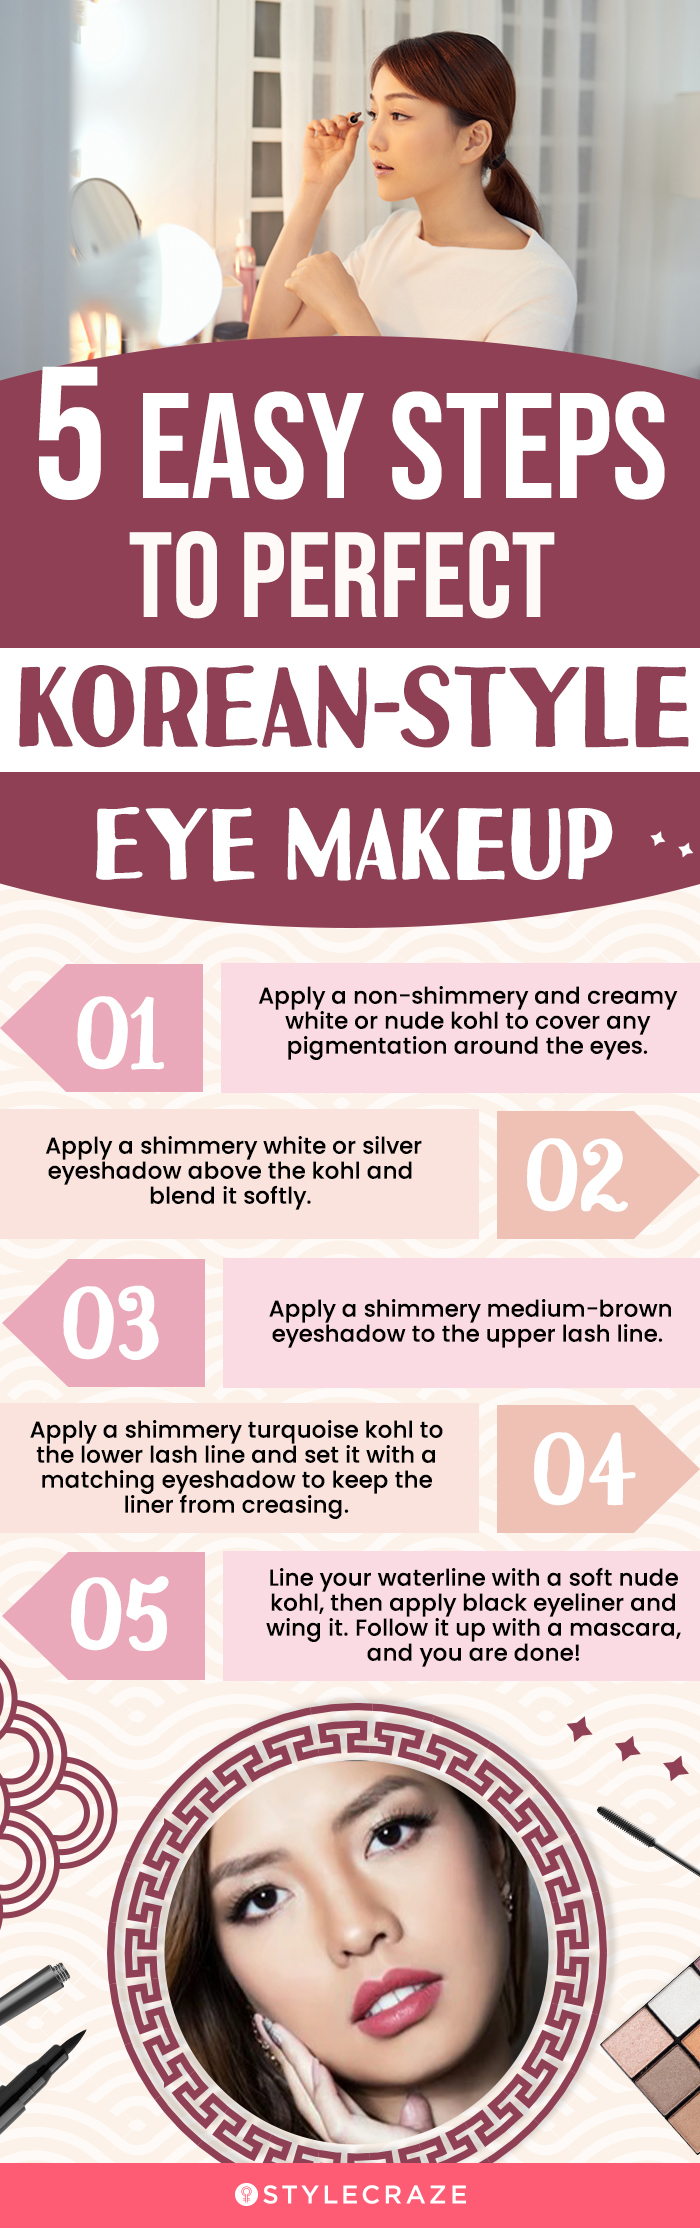 5 easy steps to perfect korean style eye makeup (infographic)